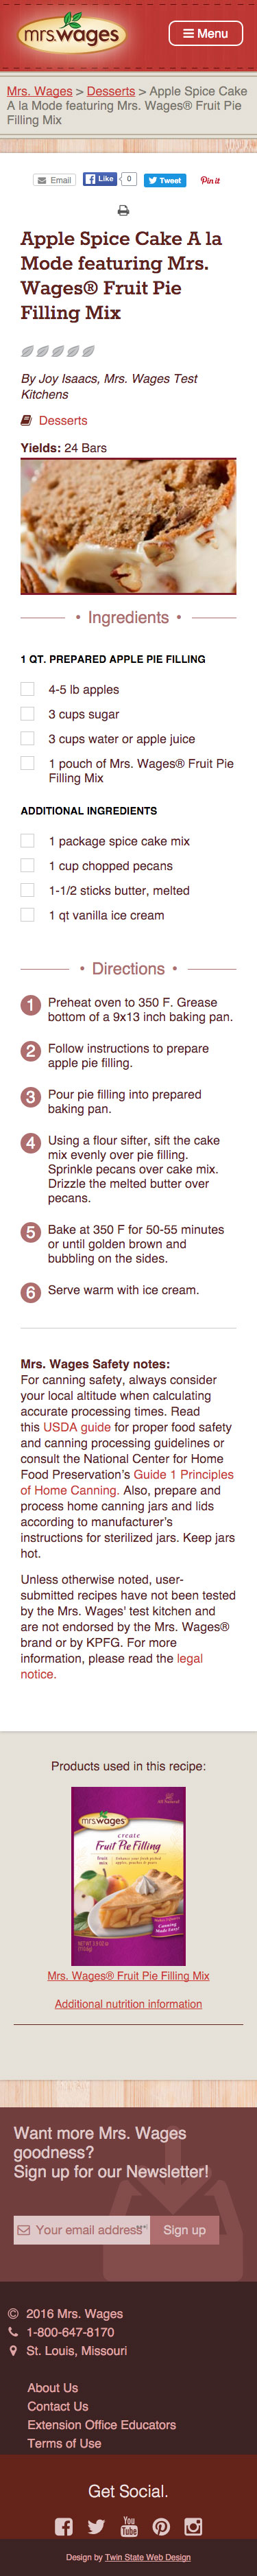 Mrs. Wages Mobile recipe page Screen shot